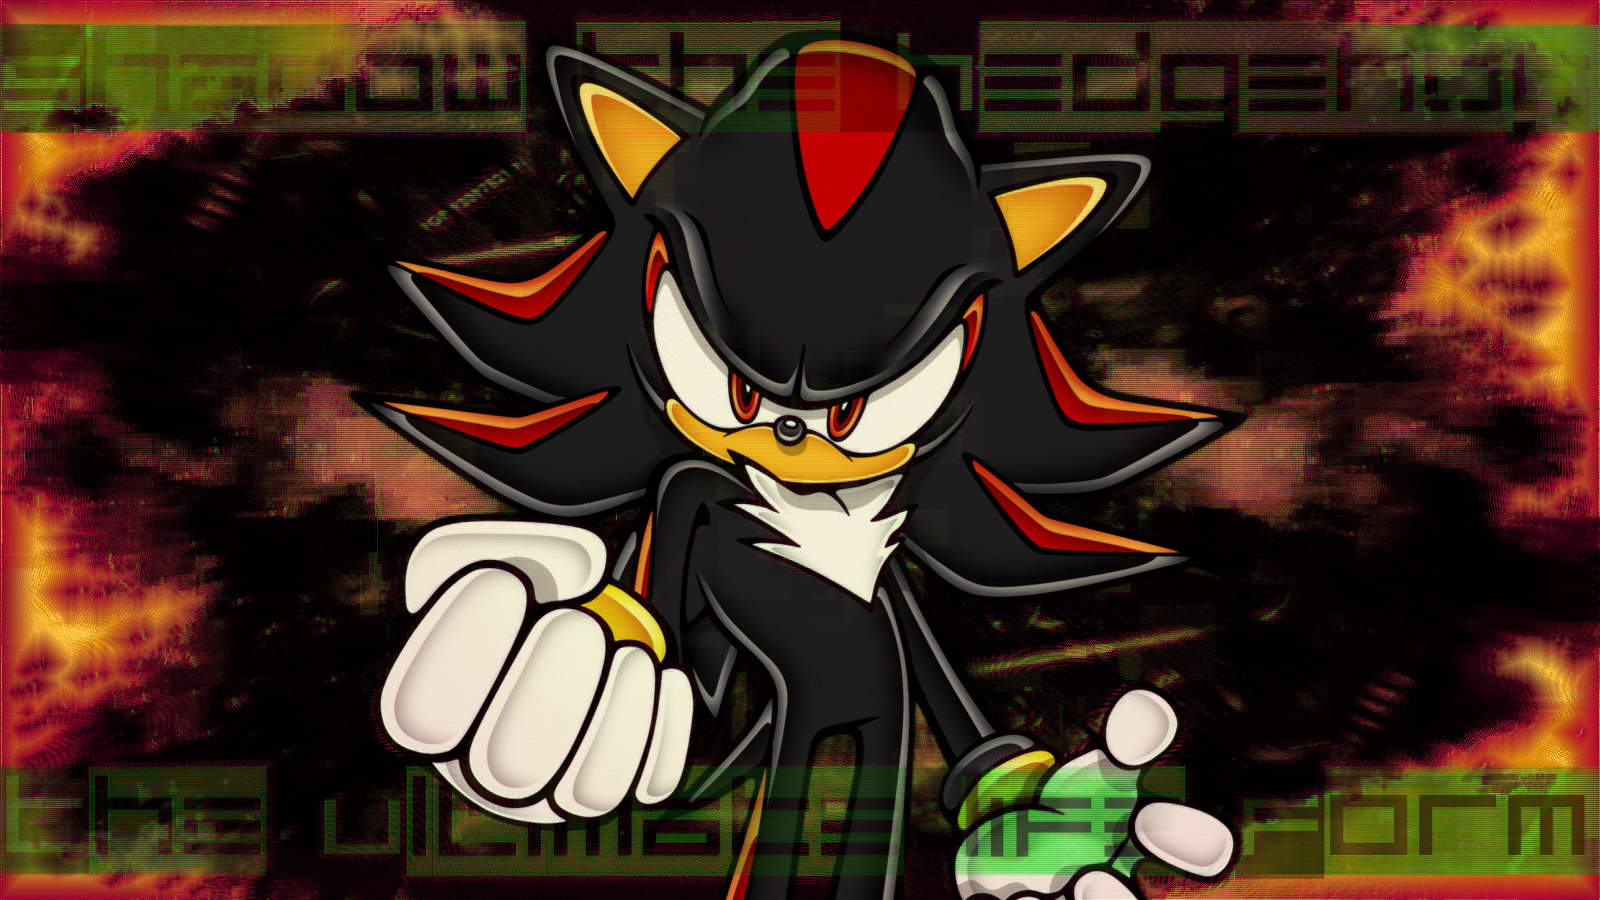 Shadow the Hedgehog from Sonic Adventure 2 by Light-Rock